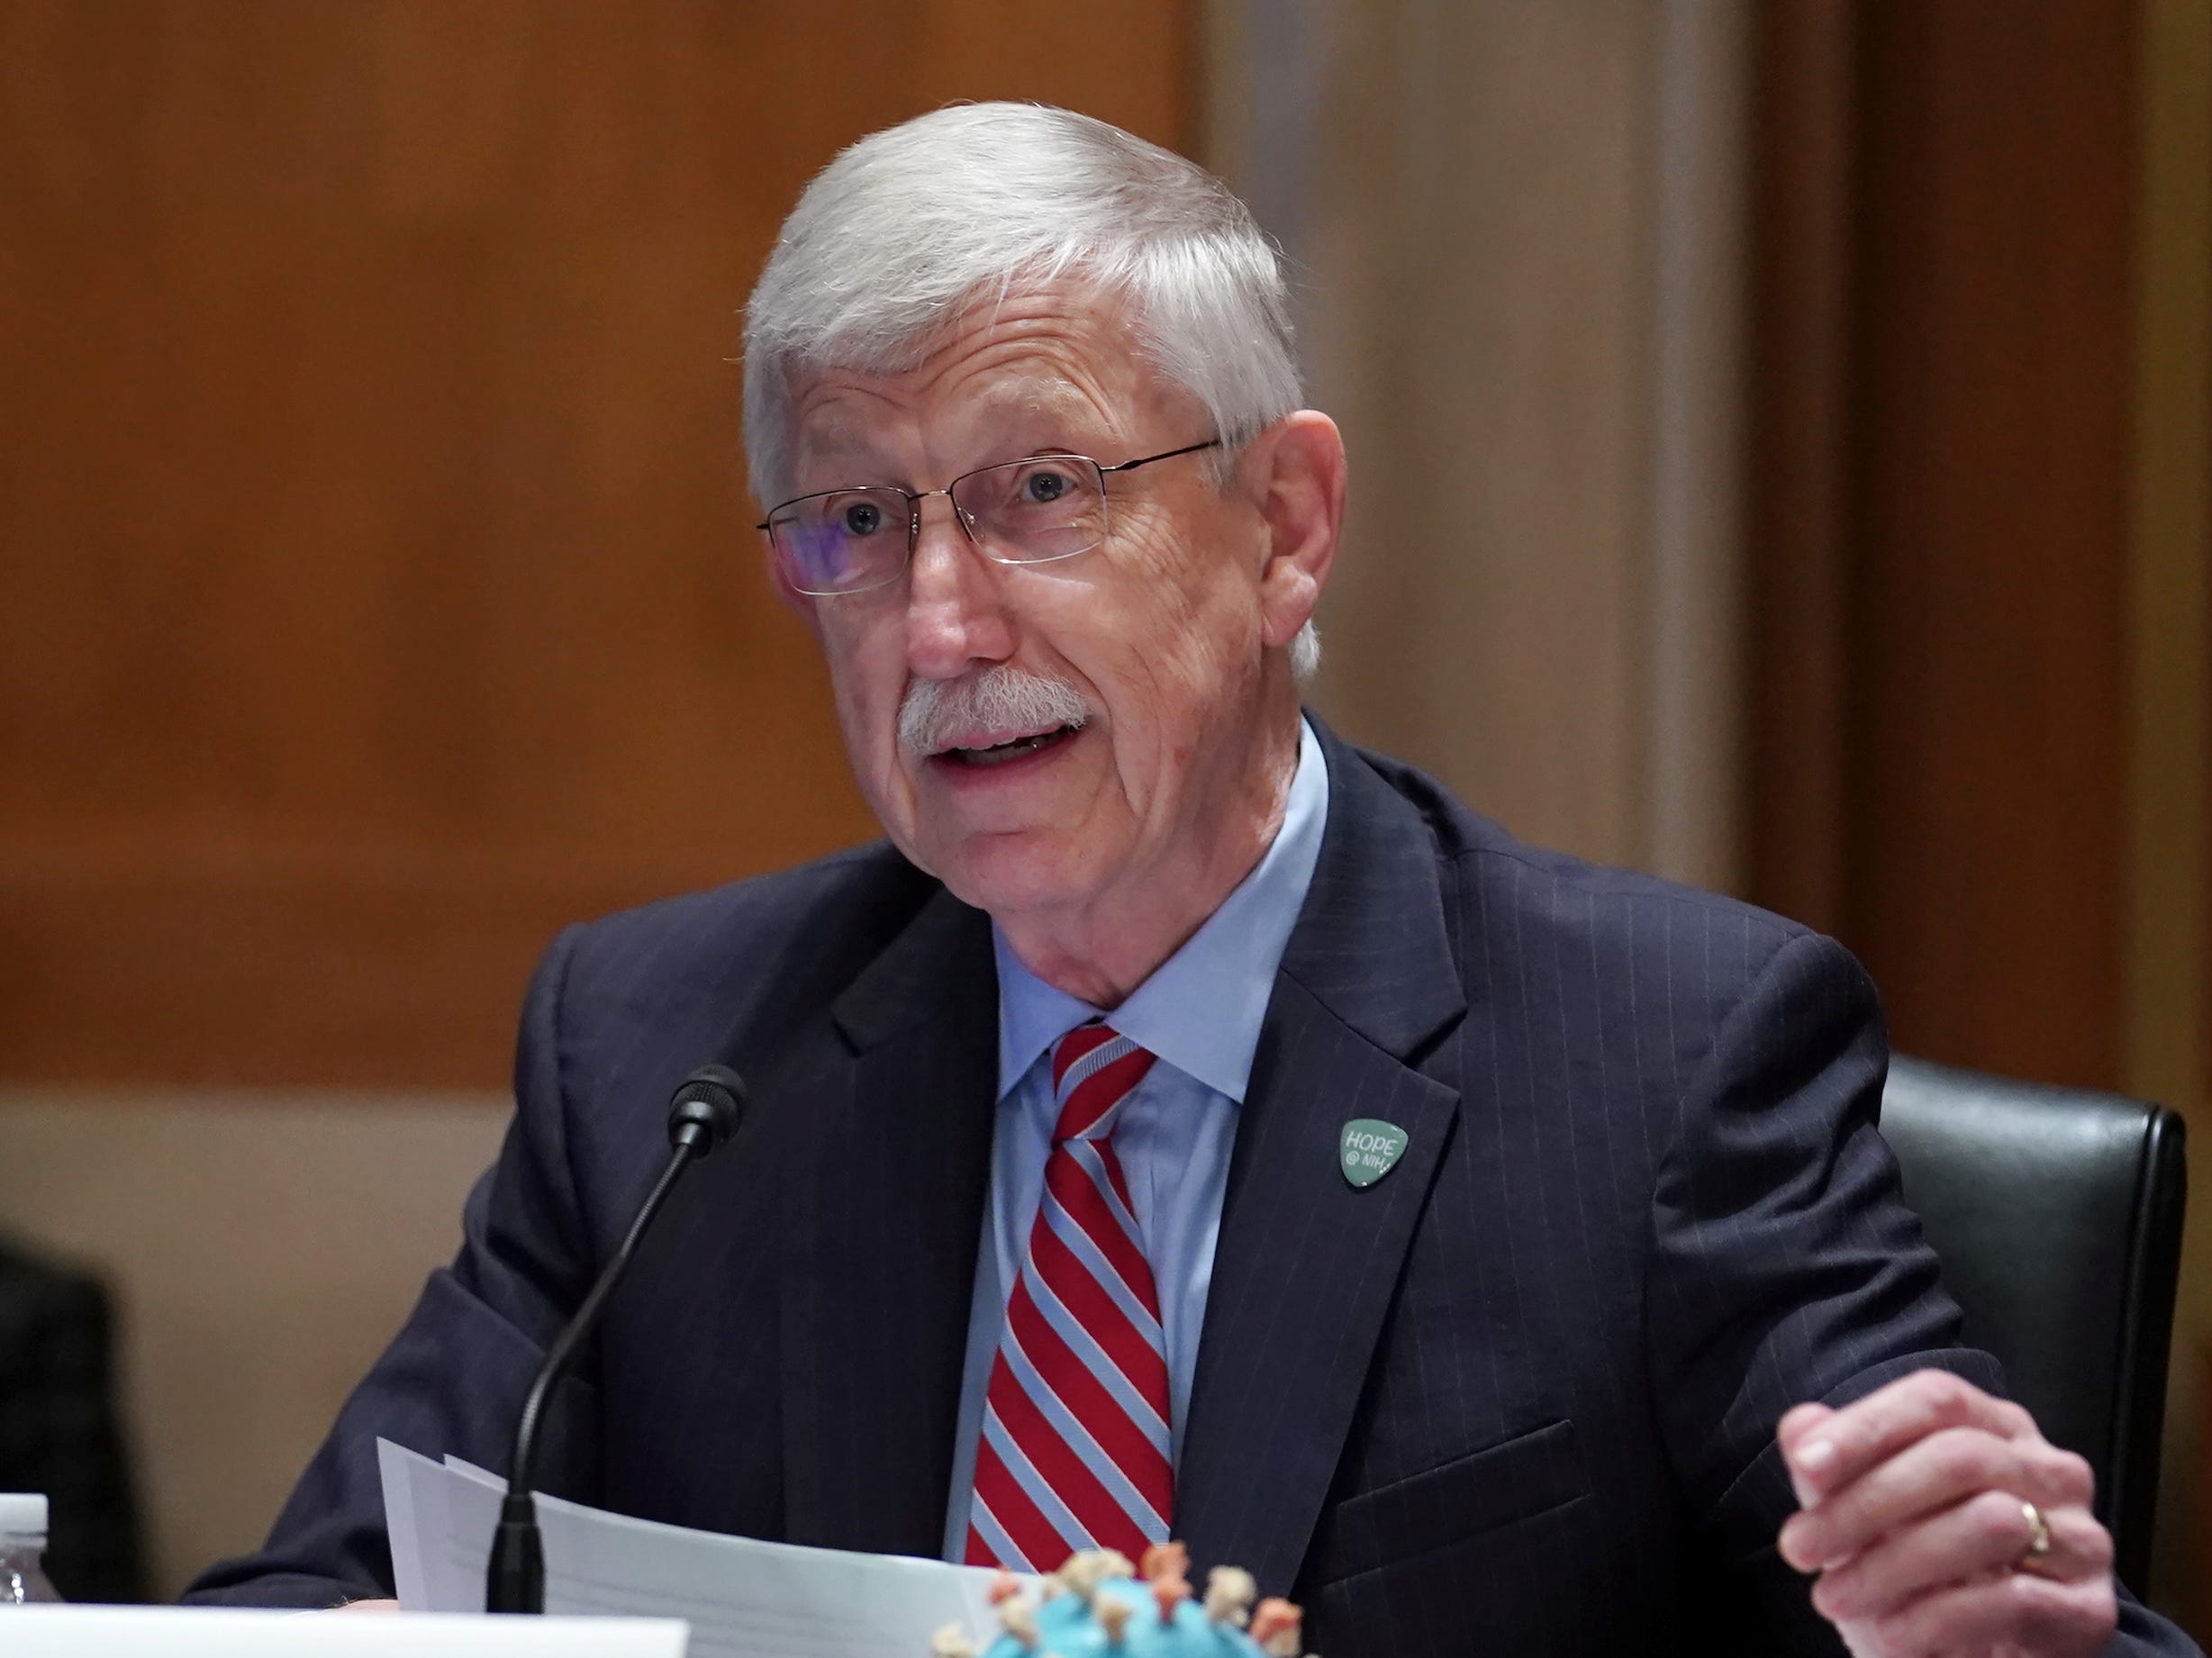 NIH Director Fr. Francis Collins testify before a Senate Appropriations Subcommittee looking into the budget estimates for National Institute of Health (NIH) and the state of medical research on Capitol Hill in Washington, U.S., May 26, 2021.